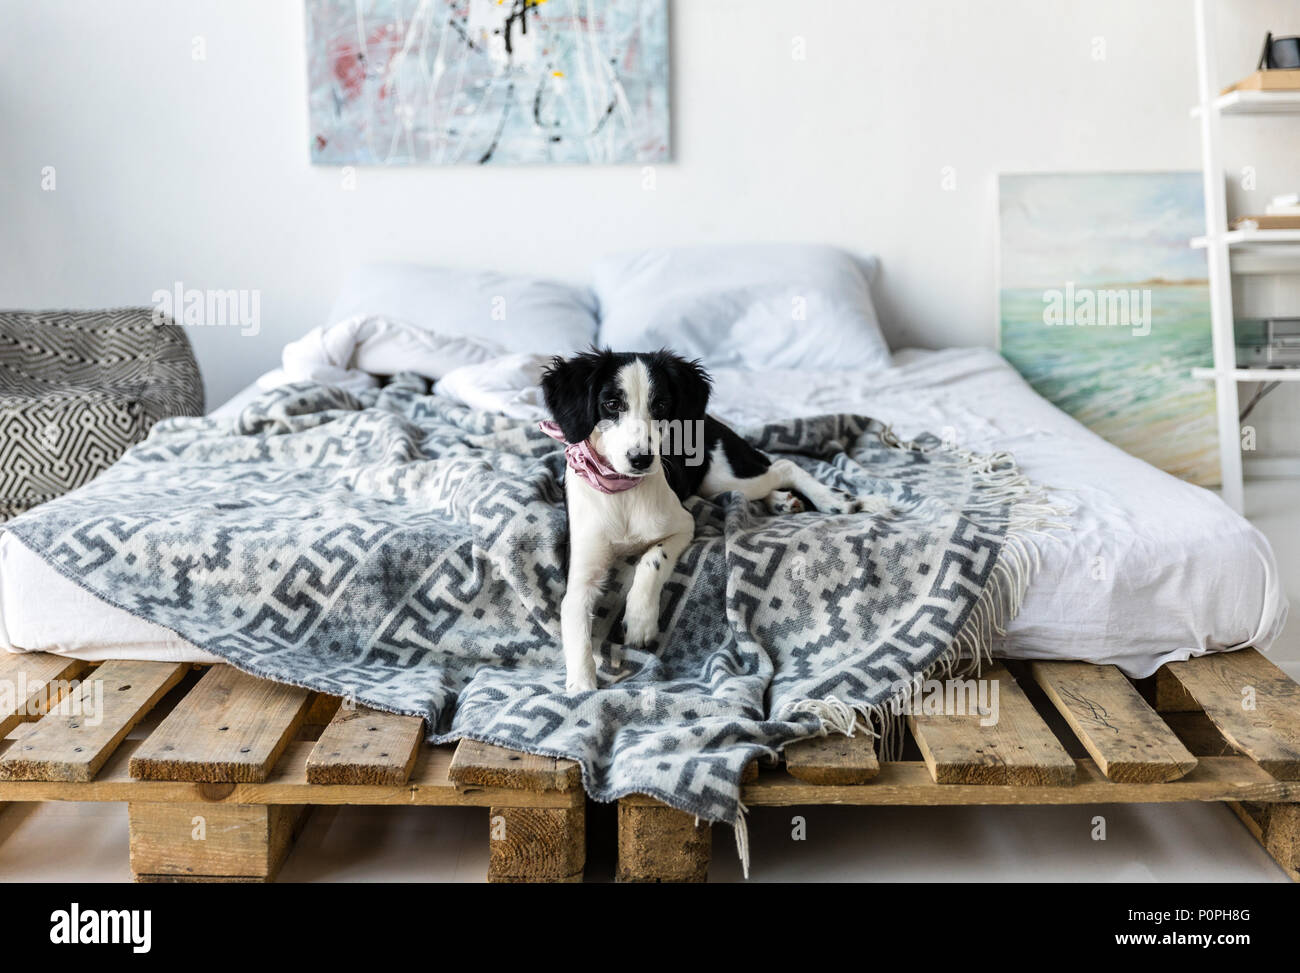 little puppy with pink neckpiece lying on bed Stock Photo